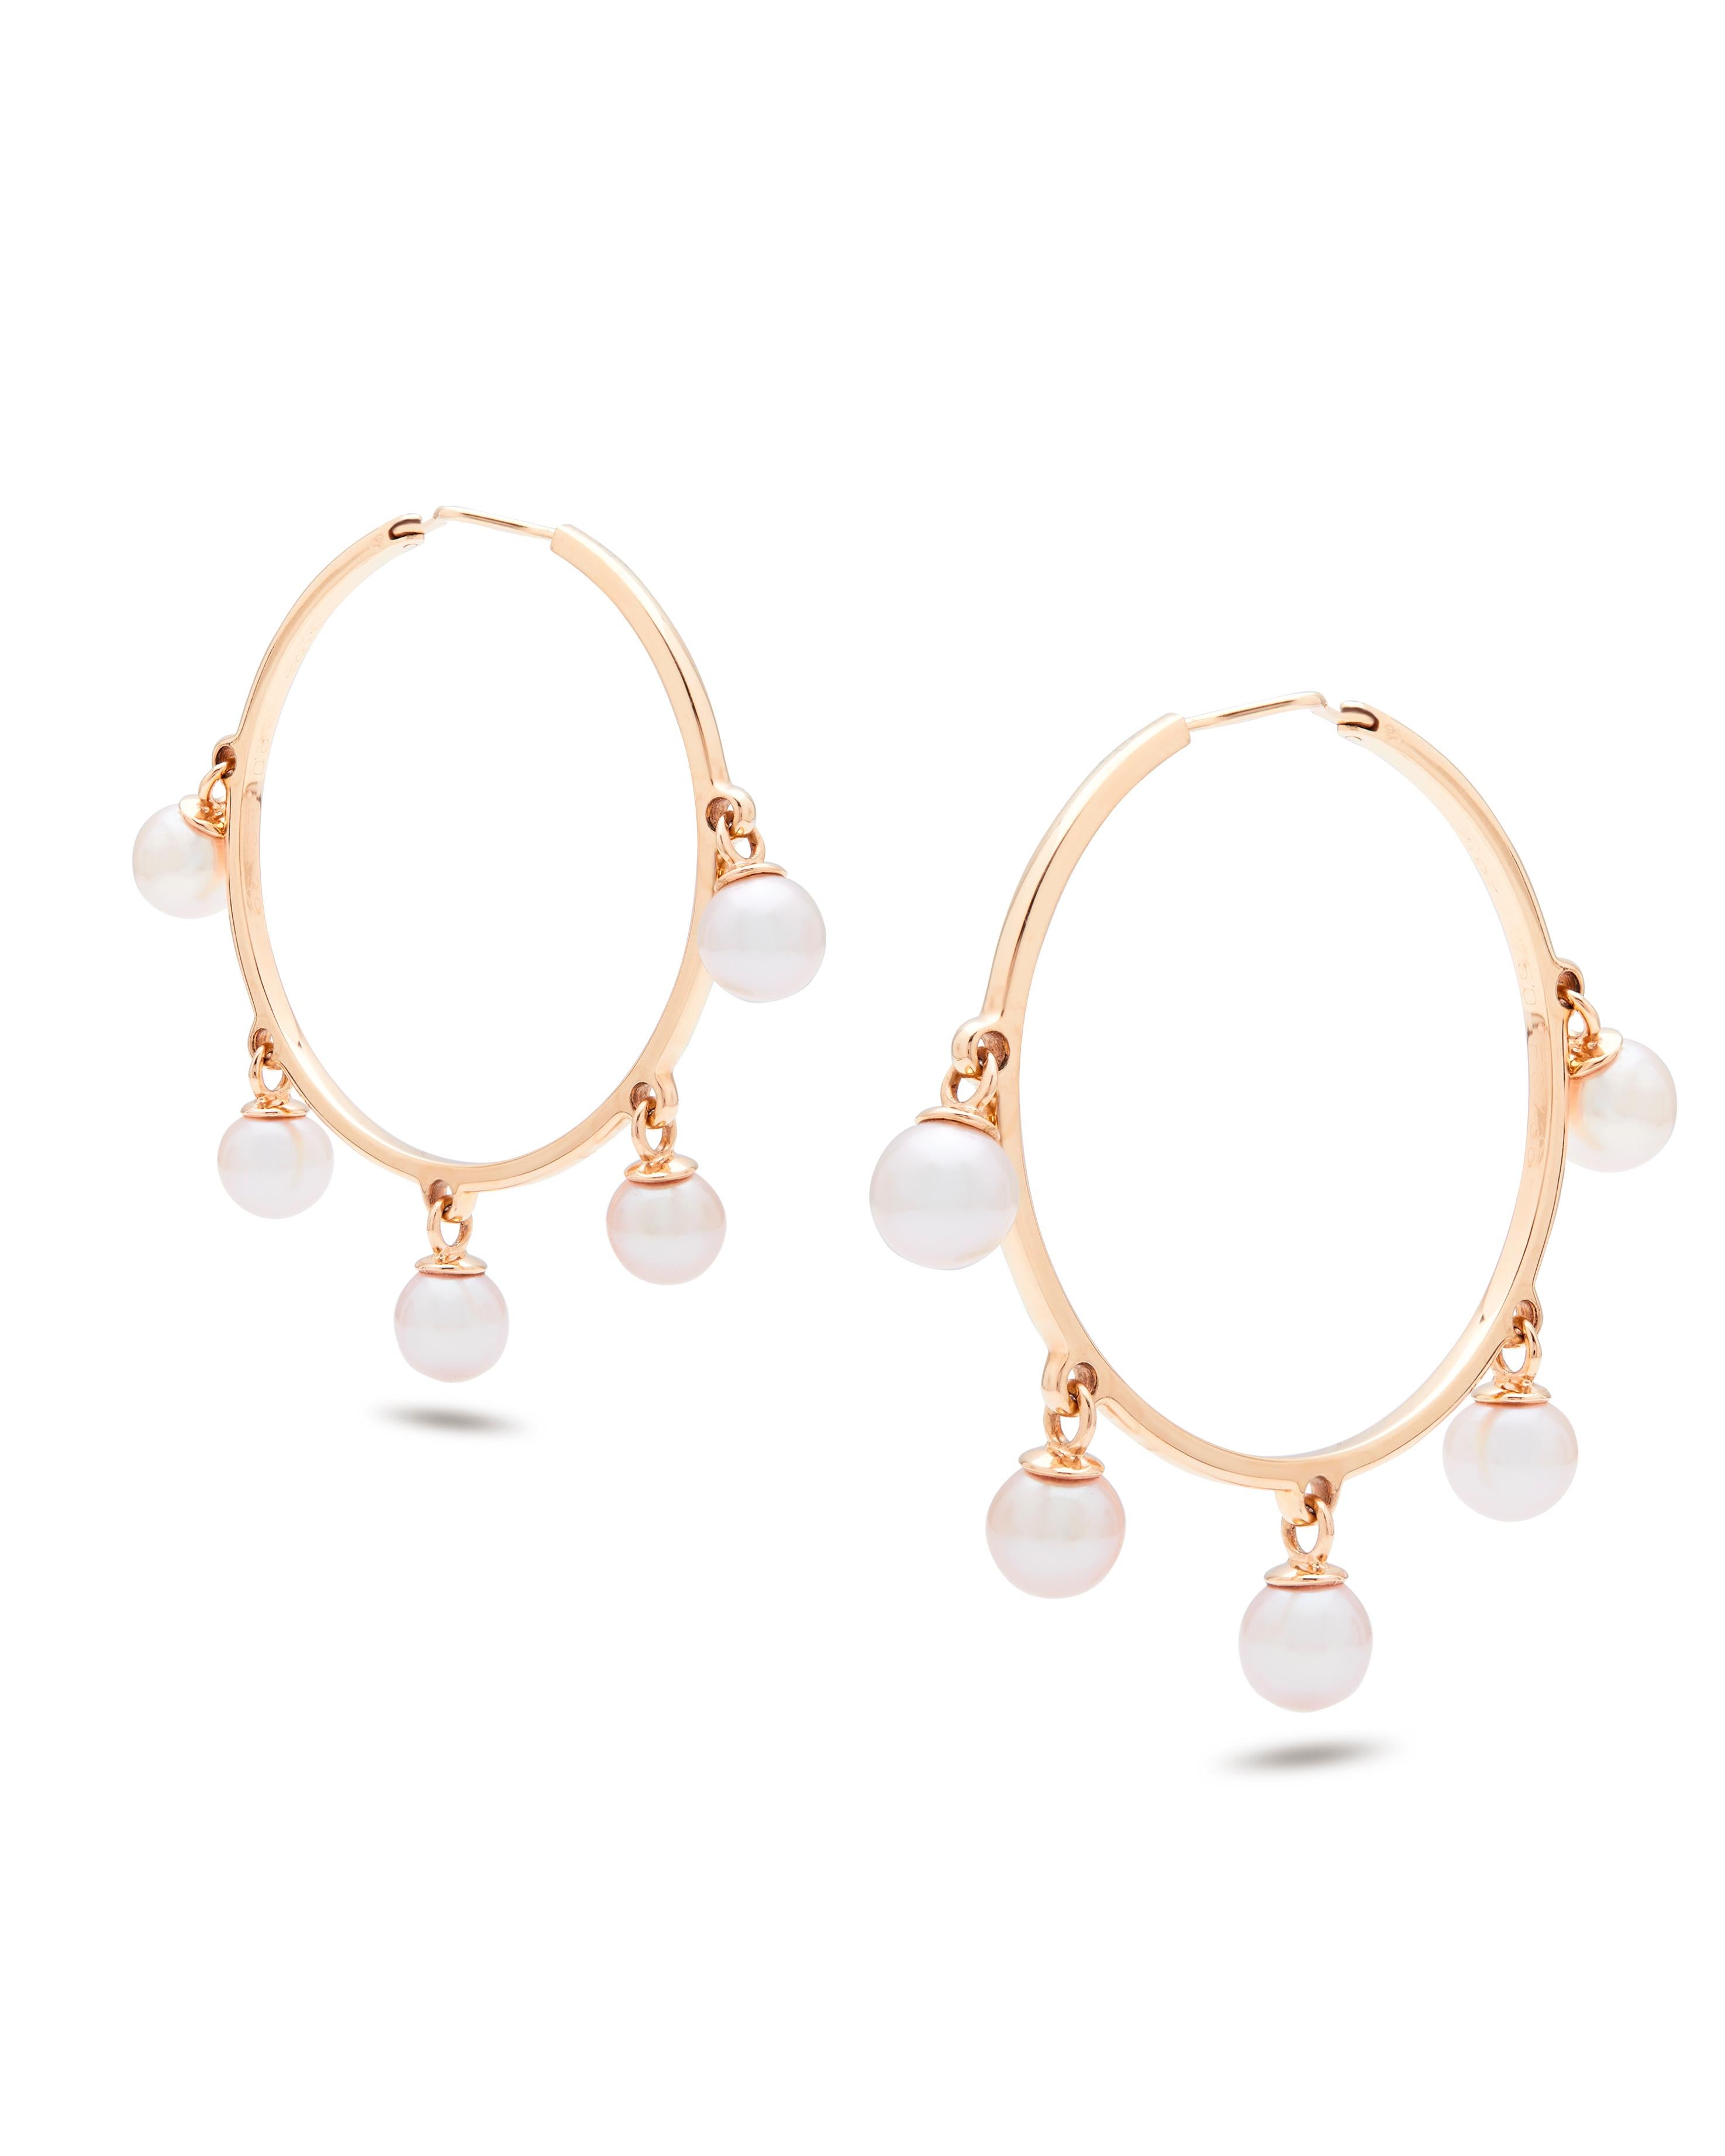 Dior the High jewellery Couture Maison creates these amazing chic earrings as a hoop. 

Crafted beautifully with Cultured Pearl drops, individually moving bringing out beautiful lustre from each pearl. 

Amazing condition, very little marks, hooks